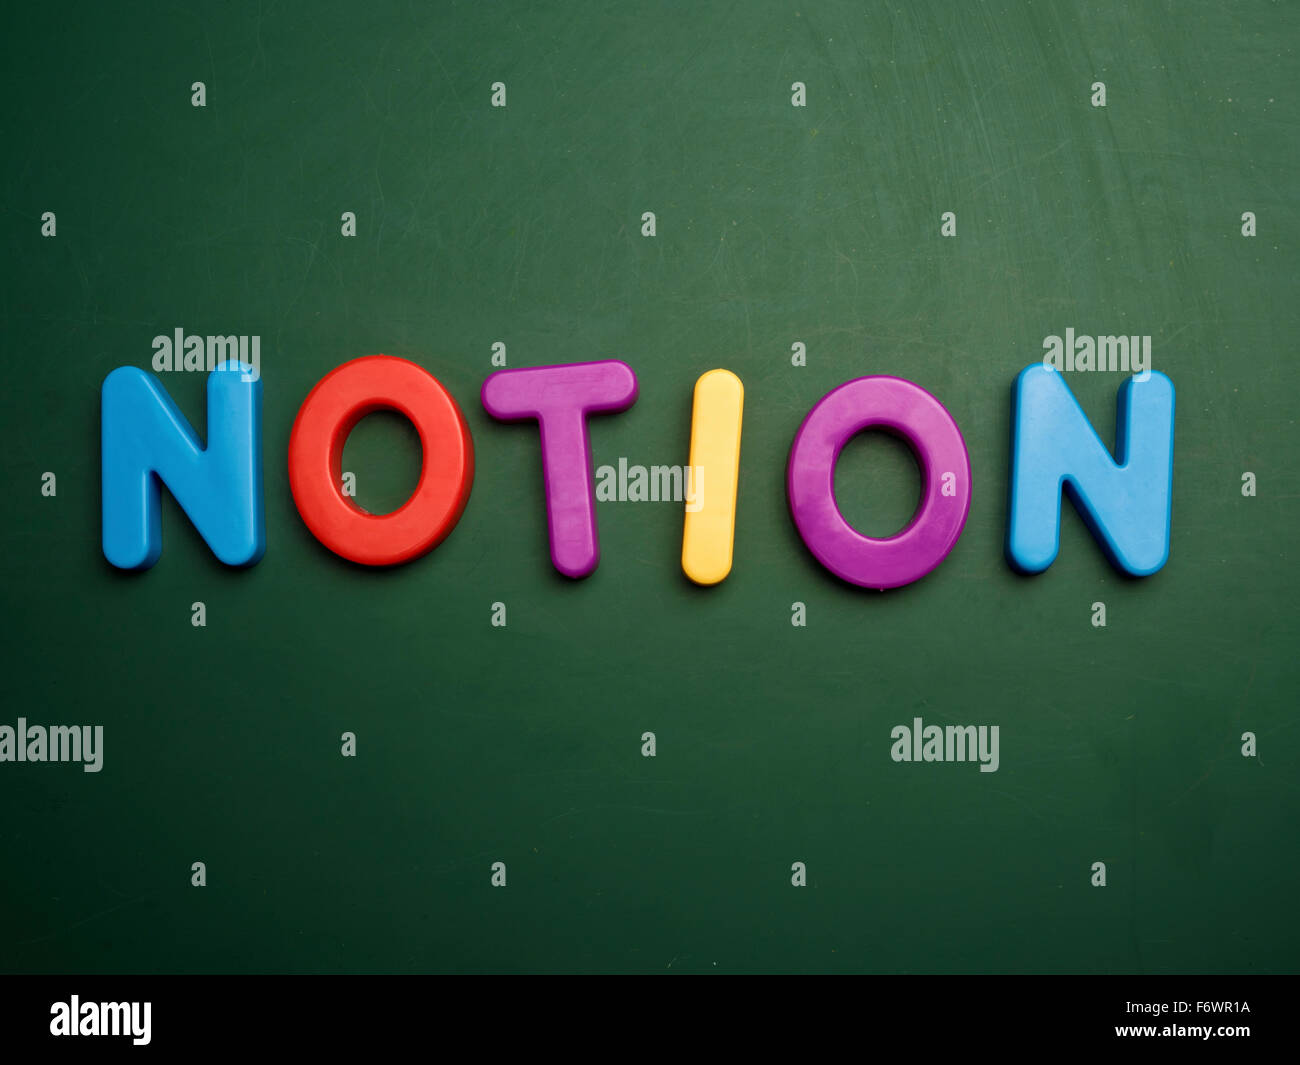 notion concept in colorful letters isolated on blank blackboard Stock Photo